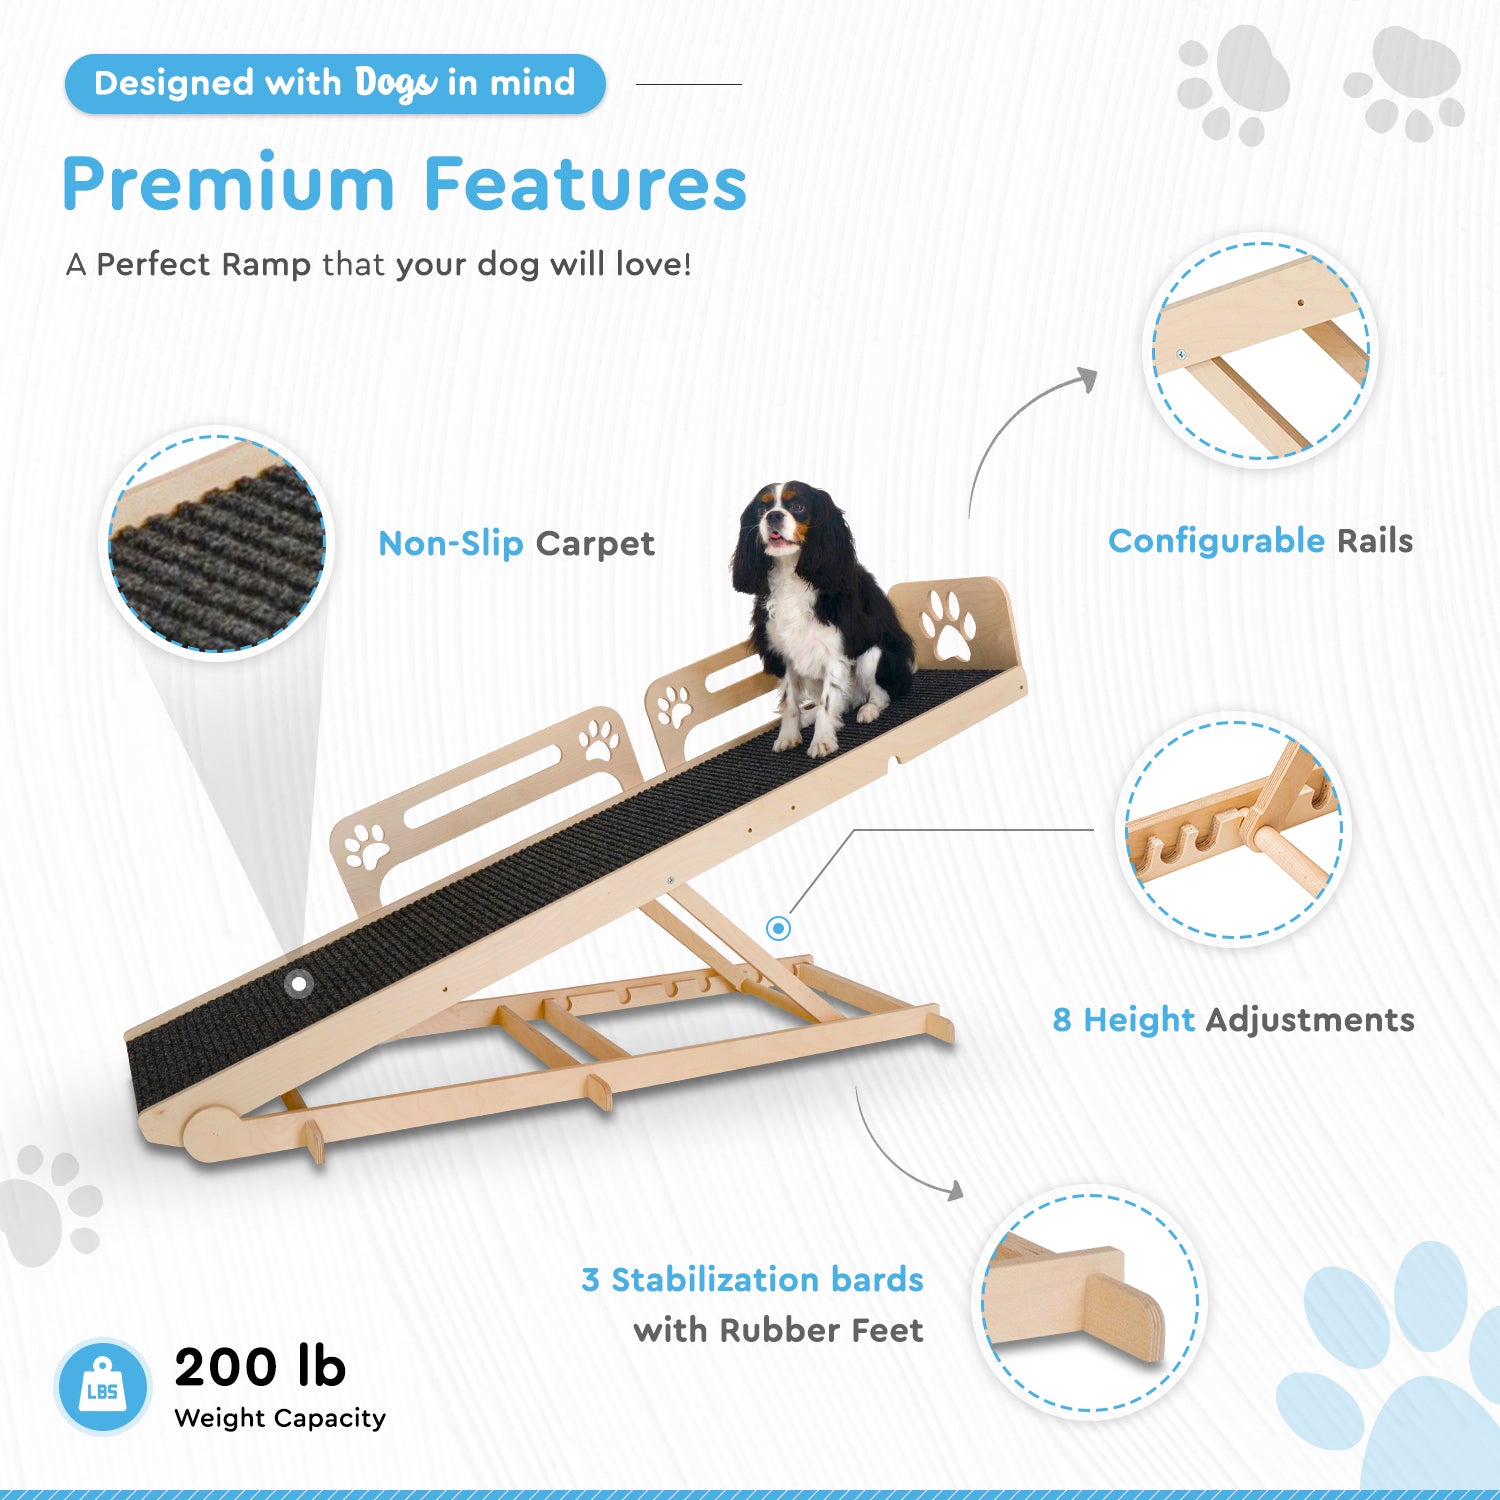 Dog Ramp for Bed with Rails - 14" to 37" Tall Bedside Dog Ramp - 65" Long and Universal Rails - Holds Up to 150LBs and works for Dogs or Cats